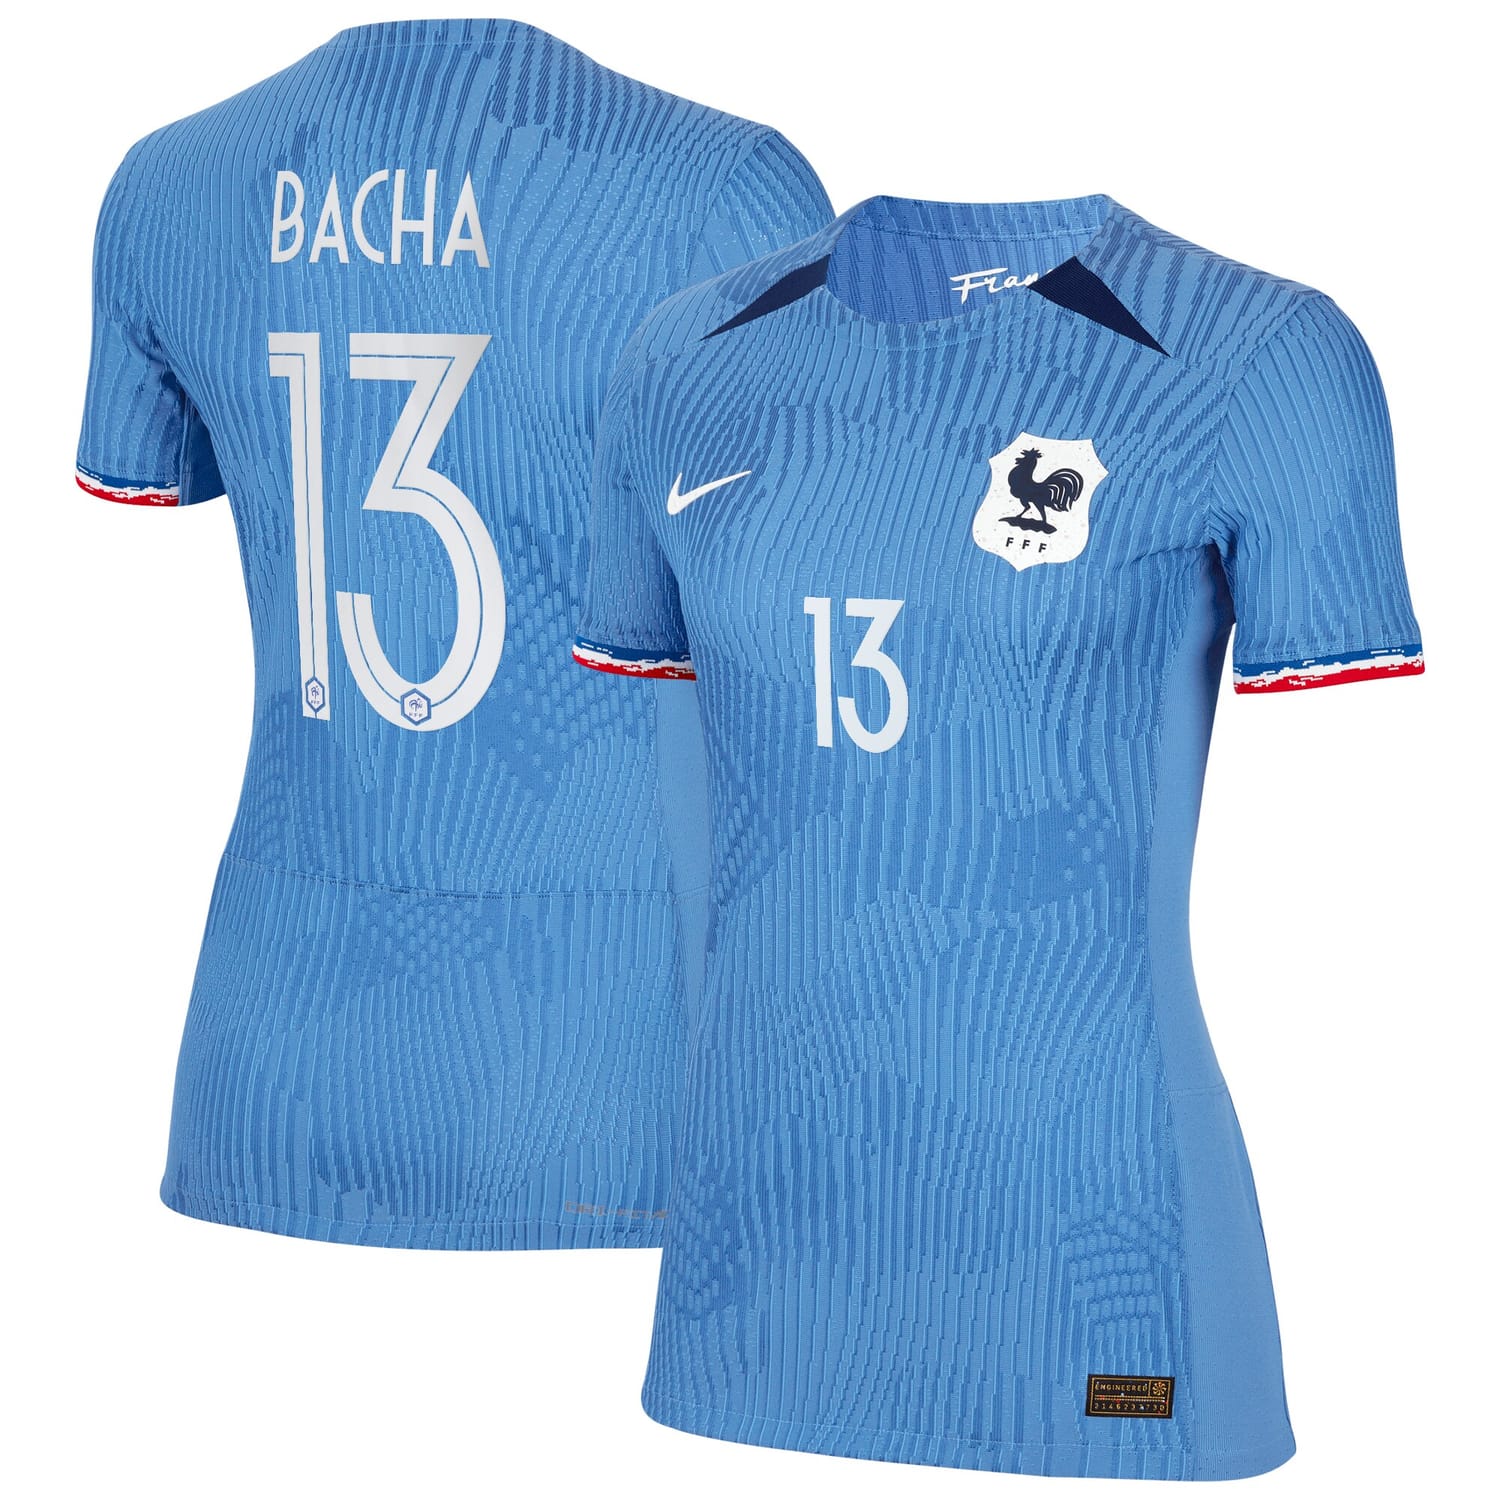 France National Team Home Authentic Jersey Shirt 2023-24 player Selma Bacha 13 printing for Women